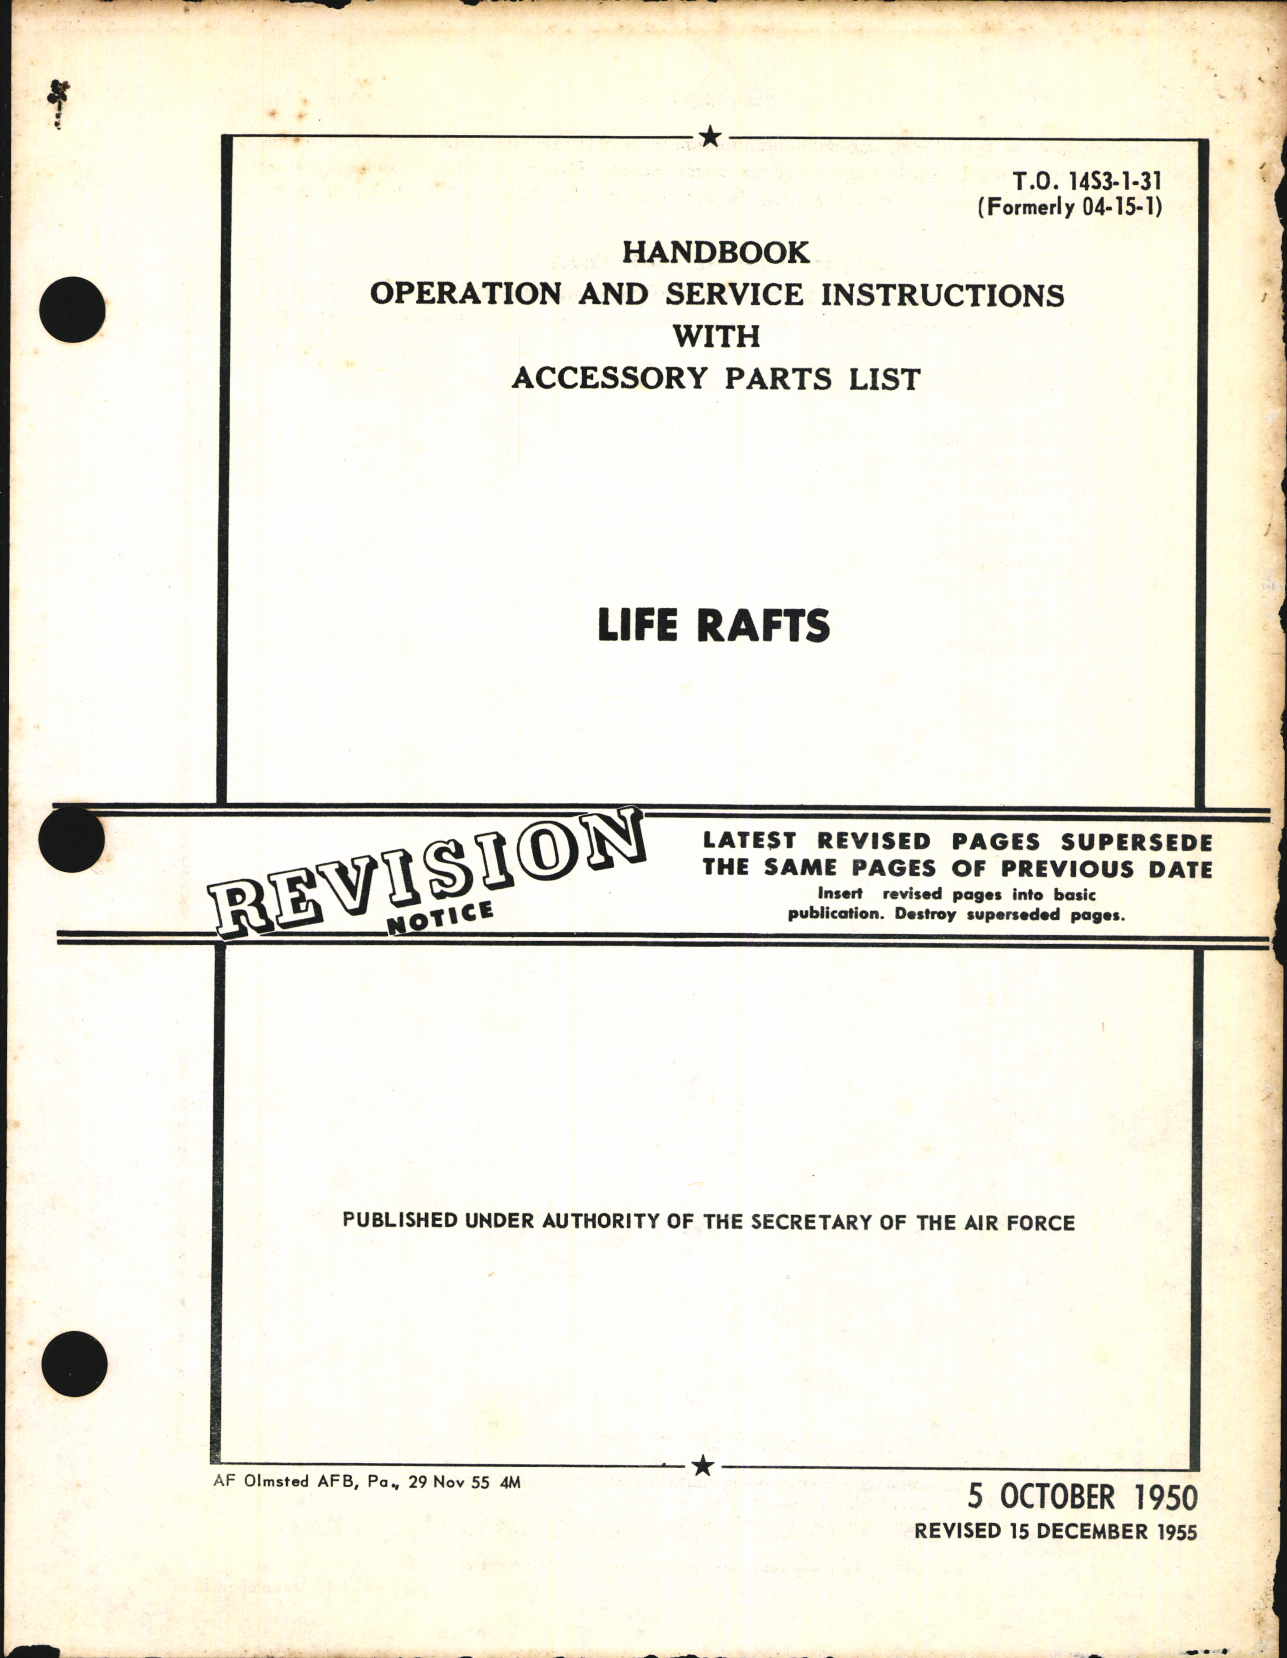 Sample page 1 from AirCorps Library document: Operation and Service Instructions with Accessory Parts List for Life Rafts